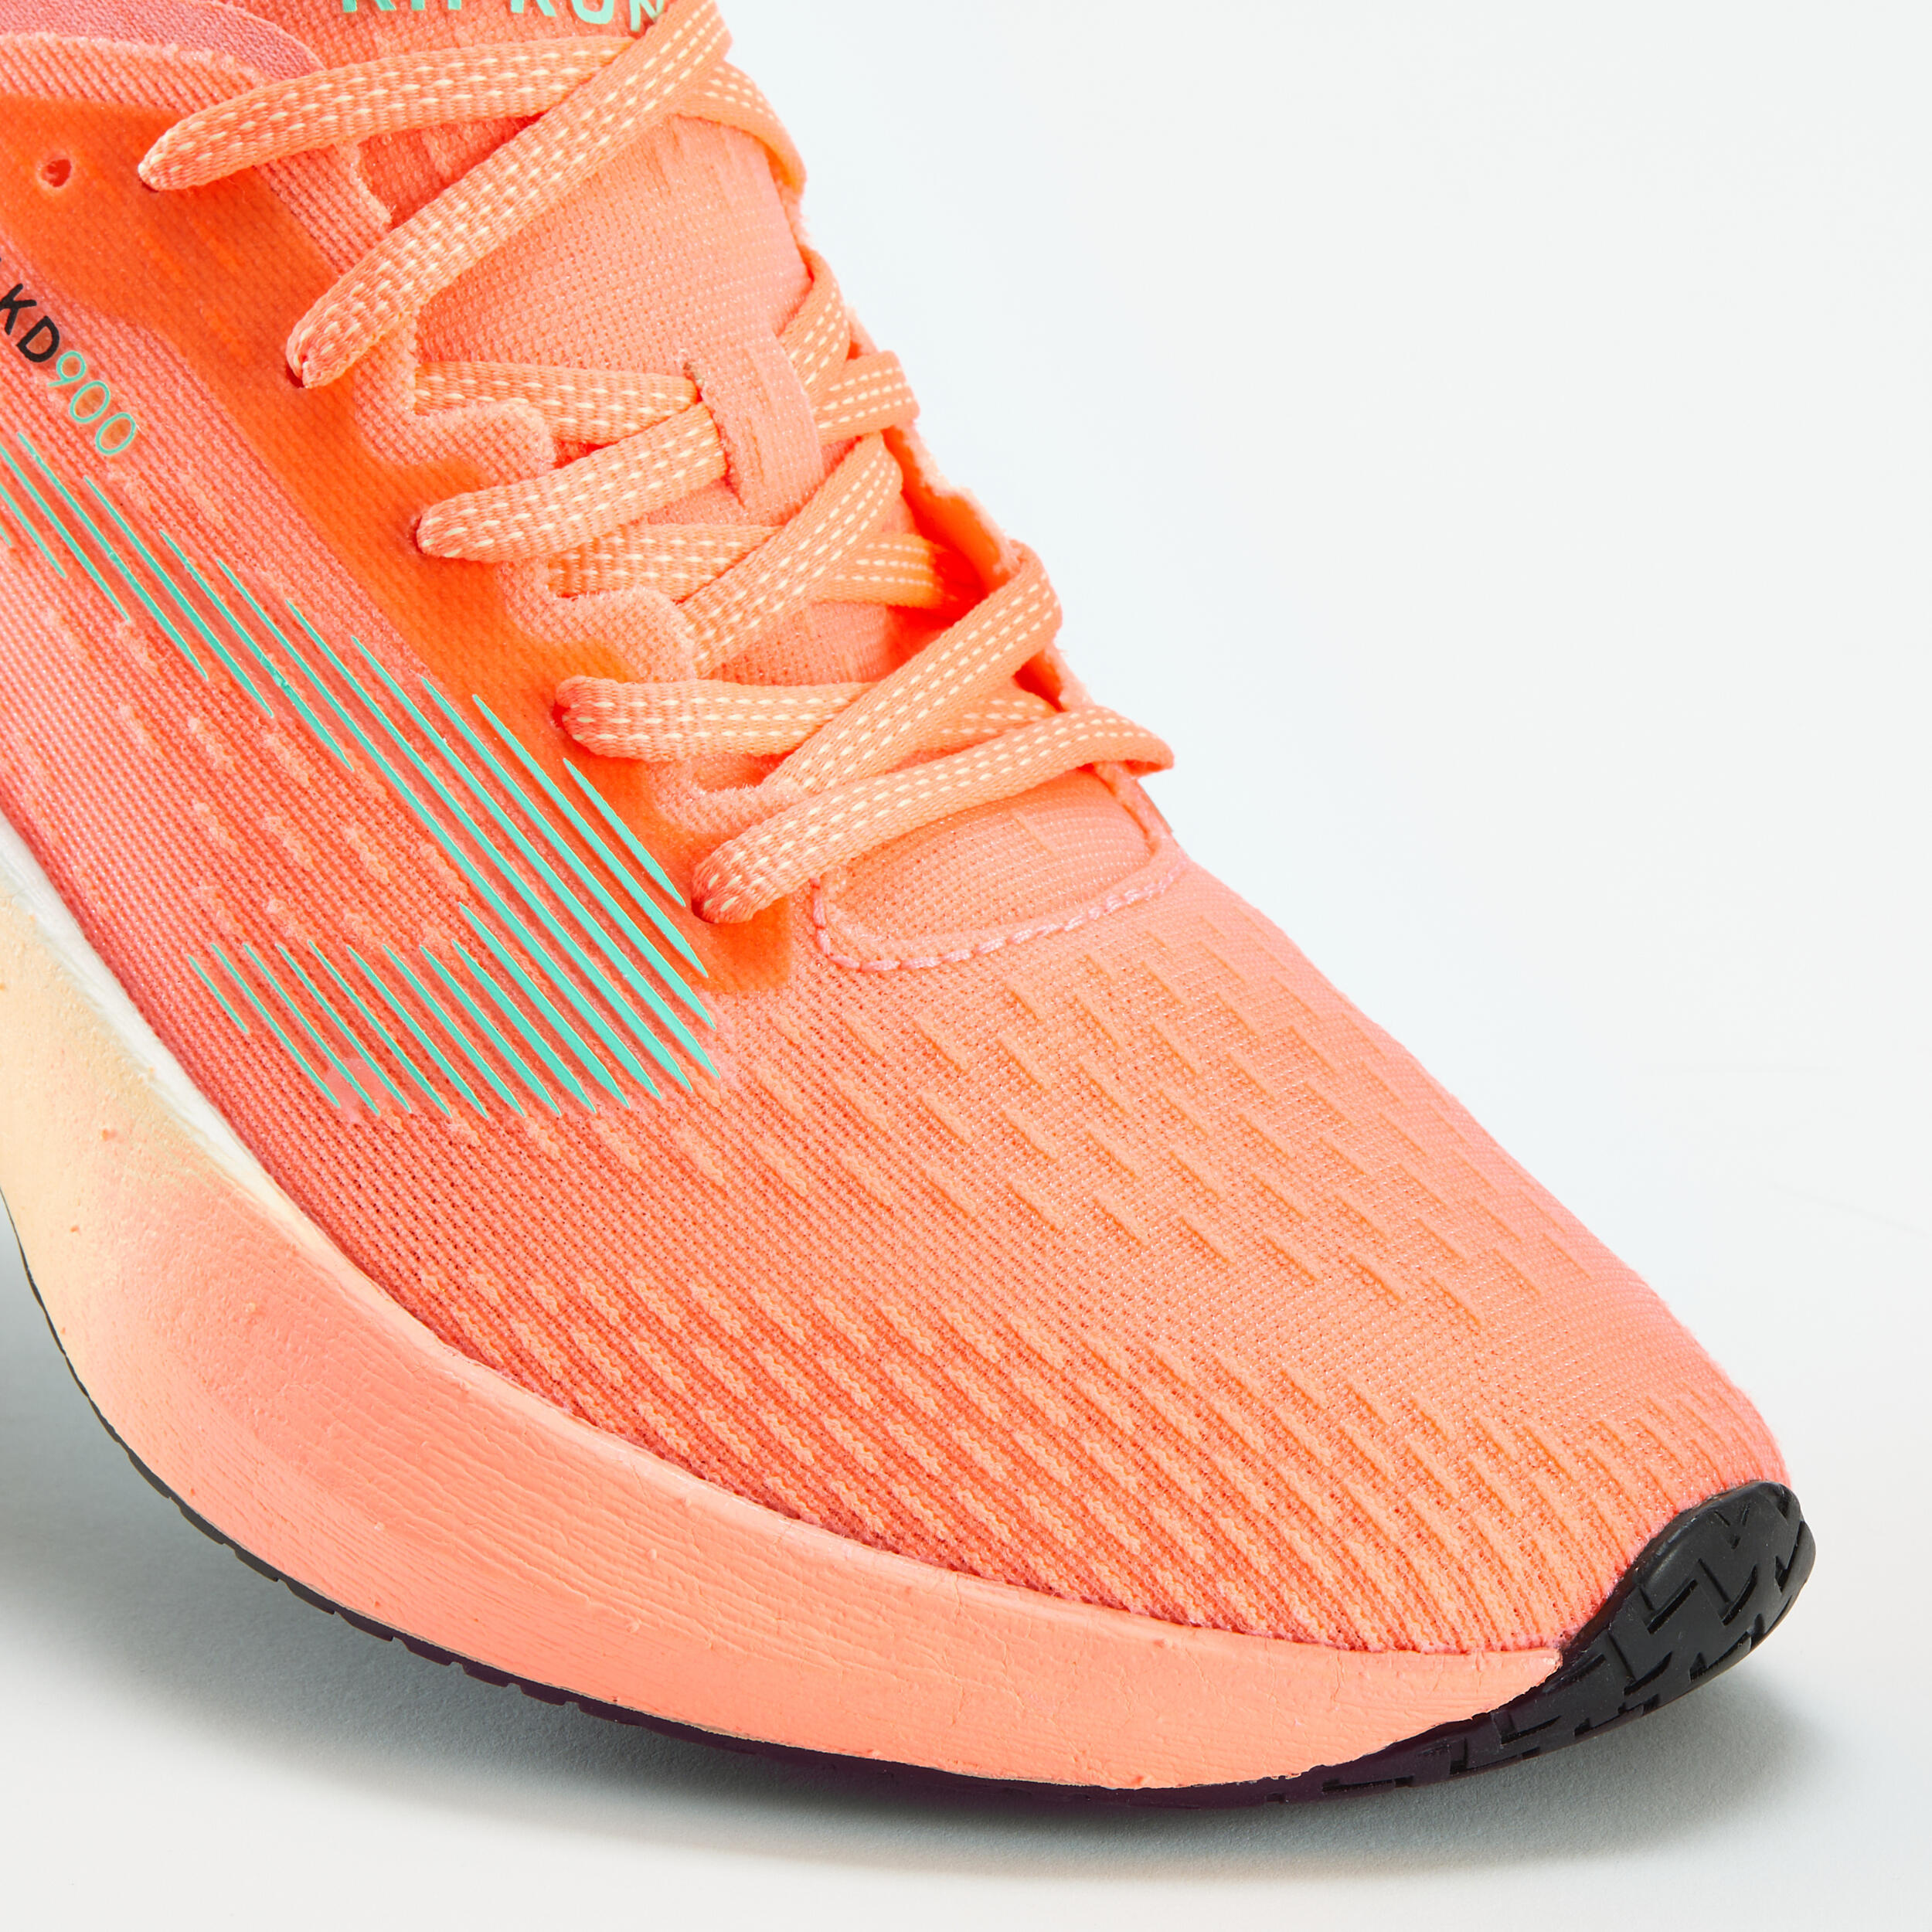 KD900 Women's Running Shoes -Coral 5/8